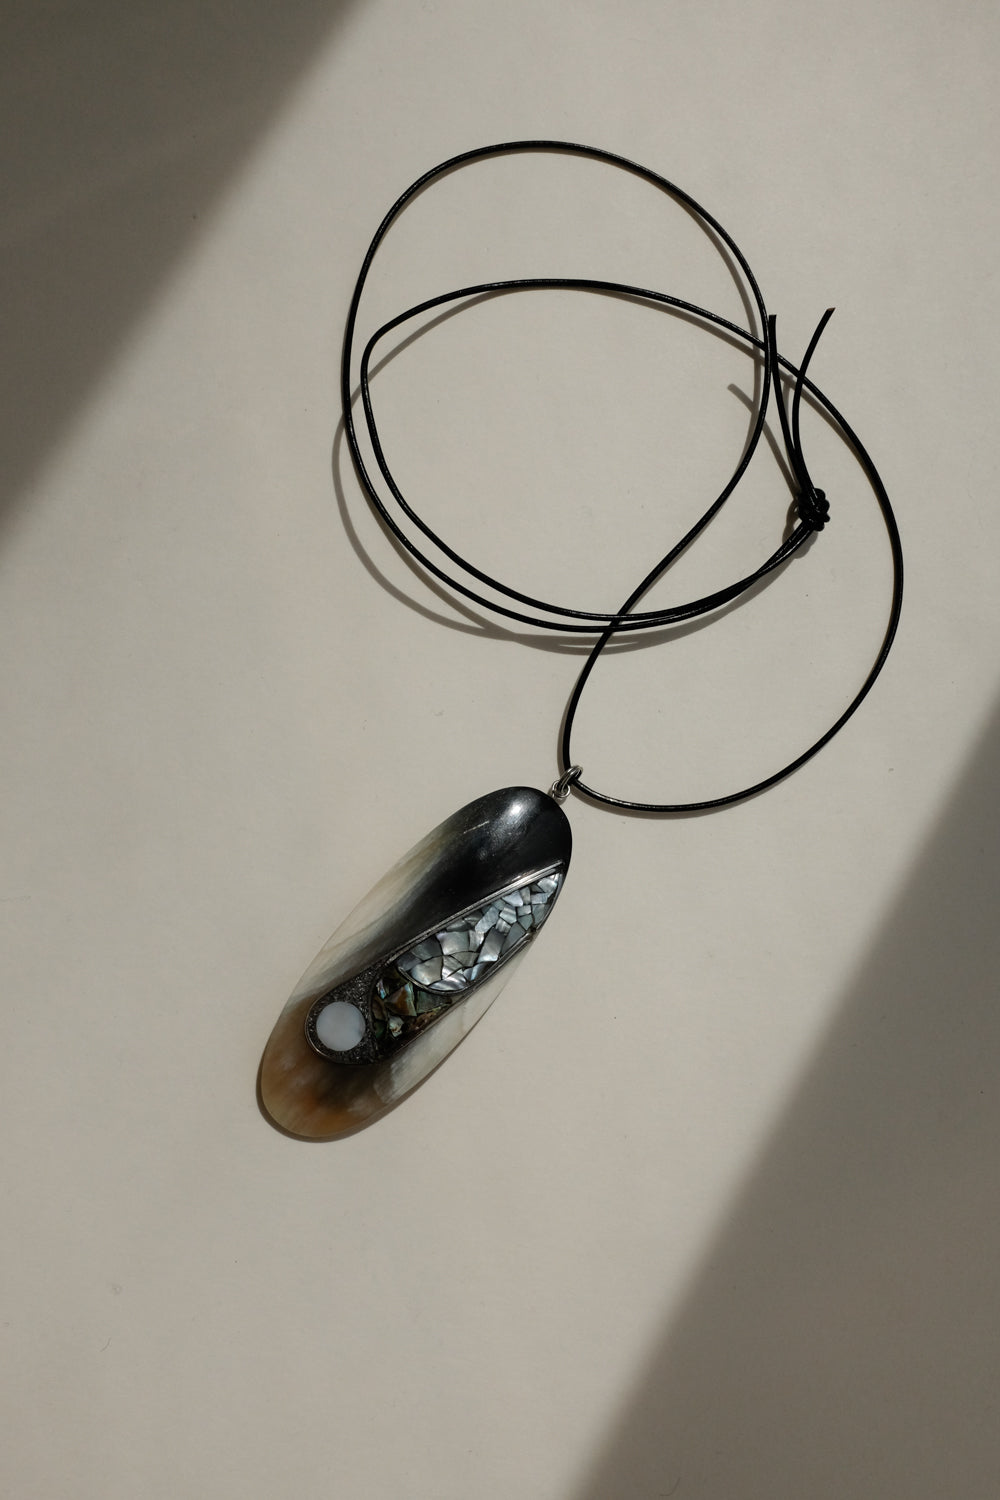 VINTAGE LEATHER NECKLACE WITH BOLD PENDANT